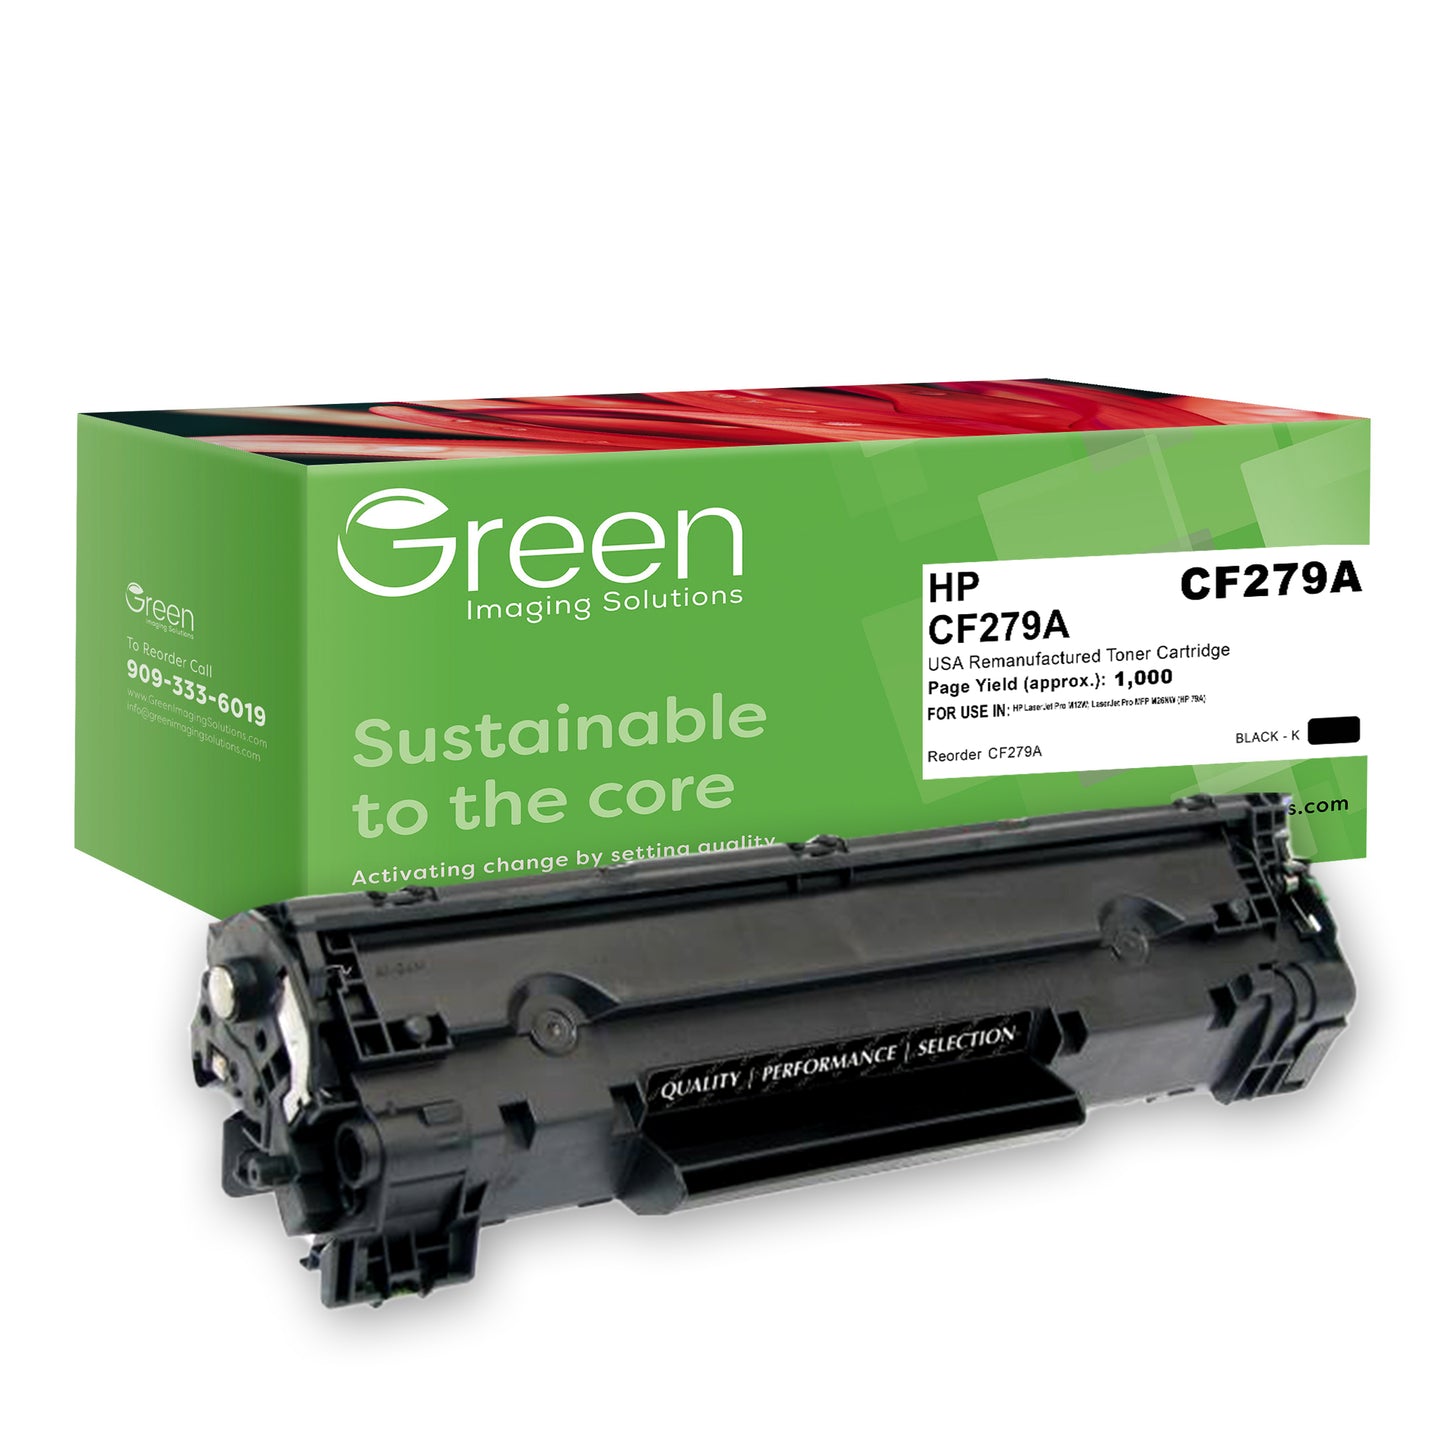 GIS USA Remanufactured Toner Cartridge for HP CF279A (HP 79A)